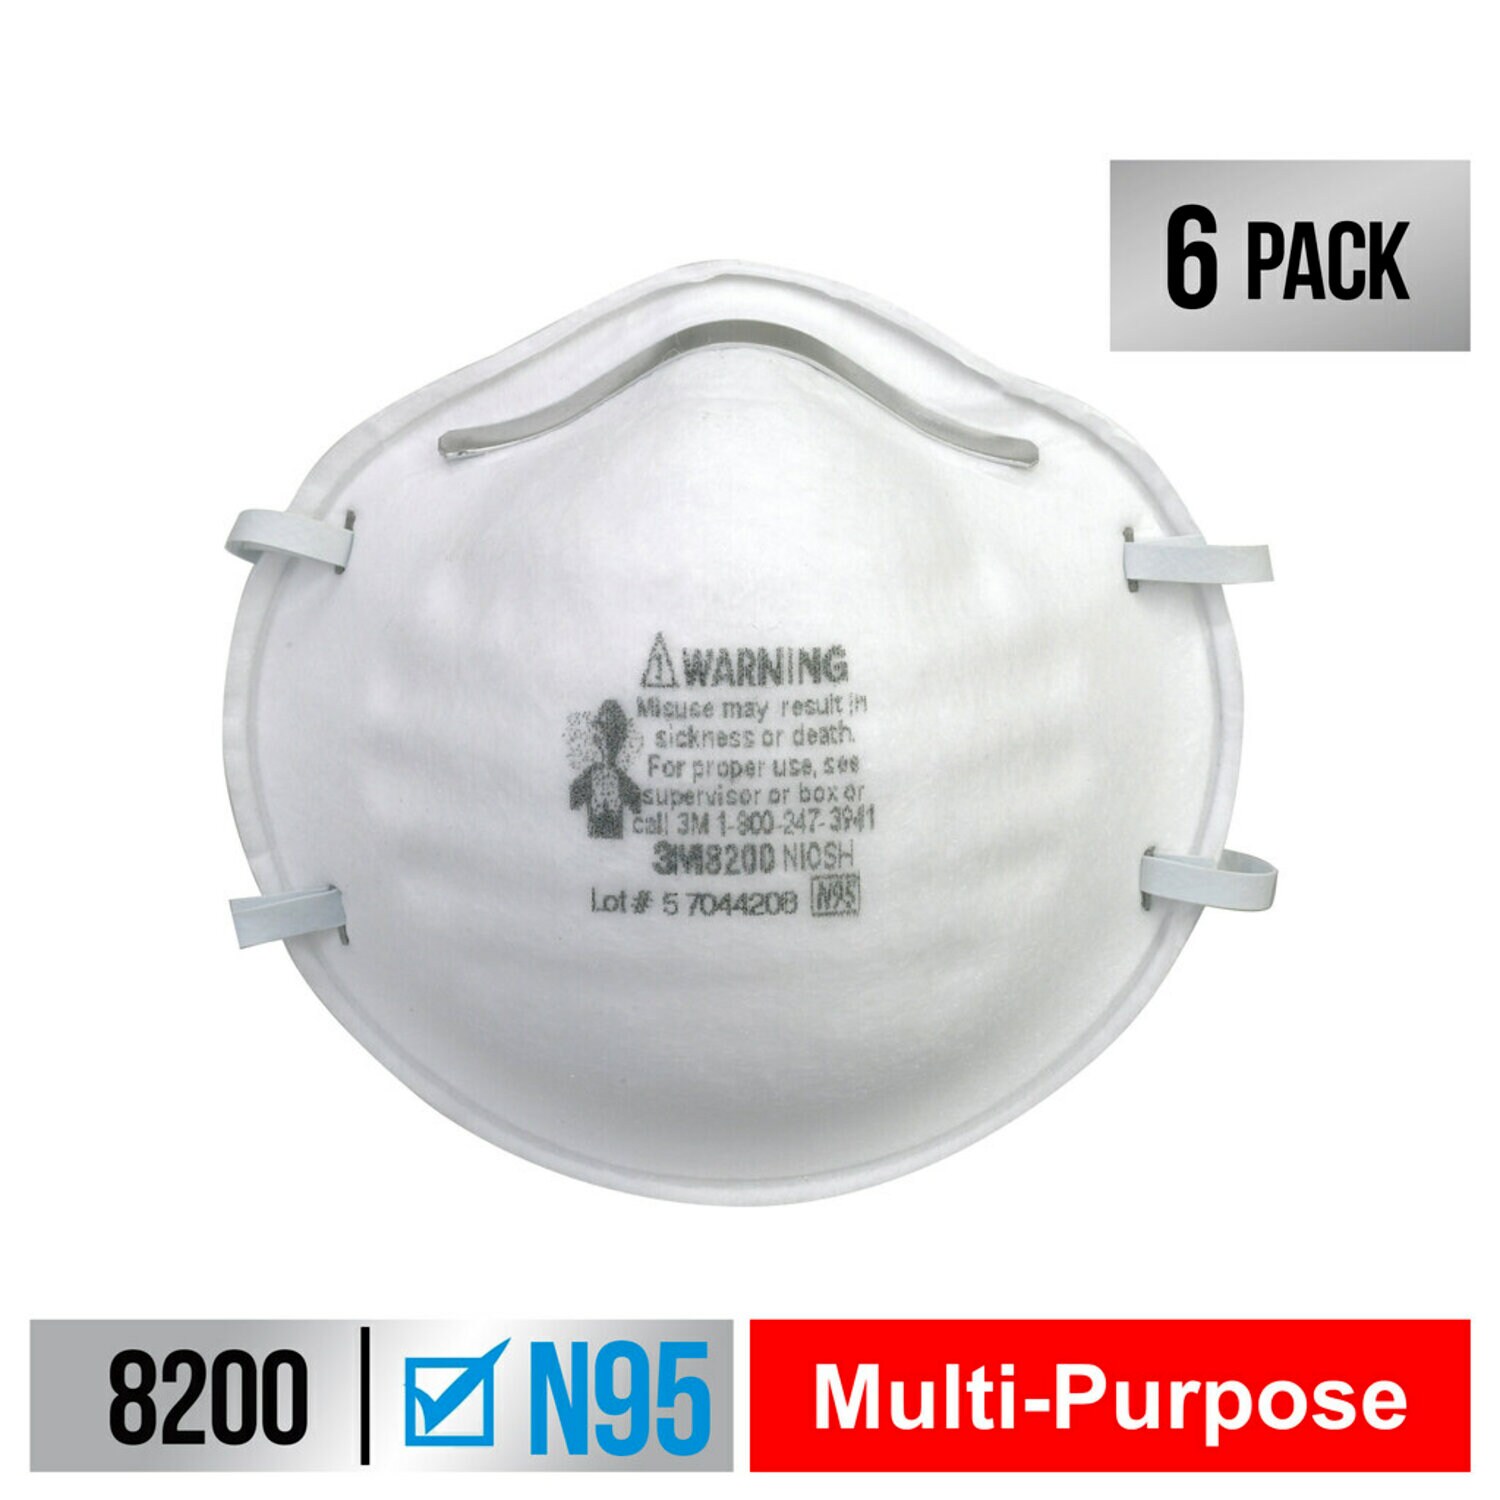 7100158824 - 3M Sanding and Fiberglass Respirator N95 Particulate, 8200H6-DC, 6
eaches/pack, 6 packs/case